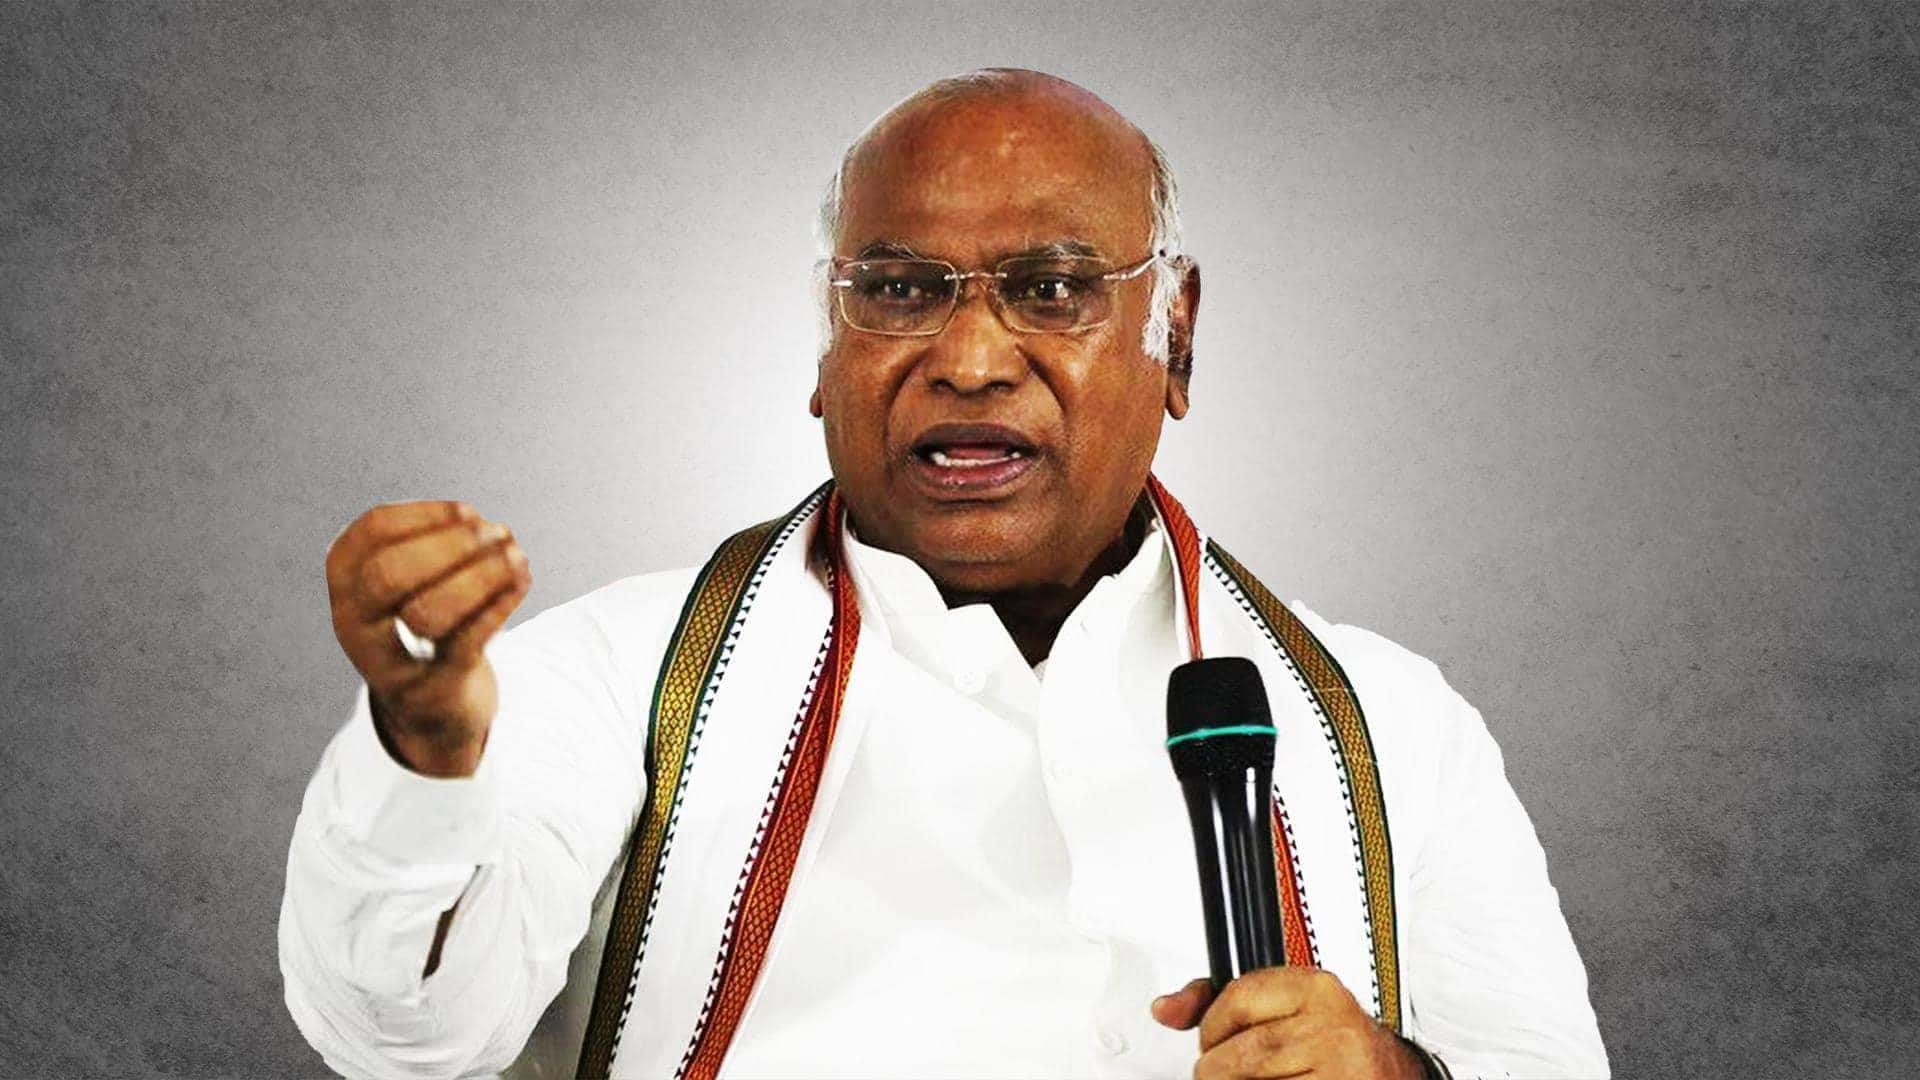 INDIA bloc proposes Congress chief Kharge as PM face: Report